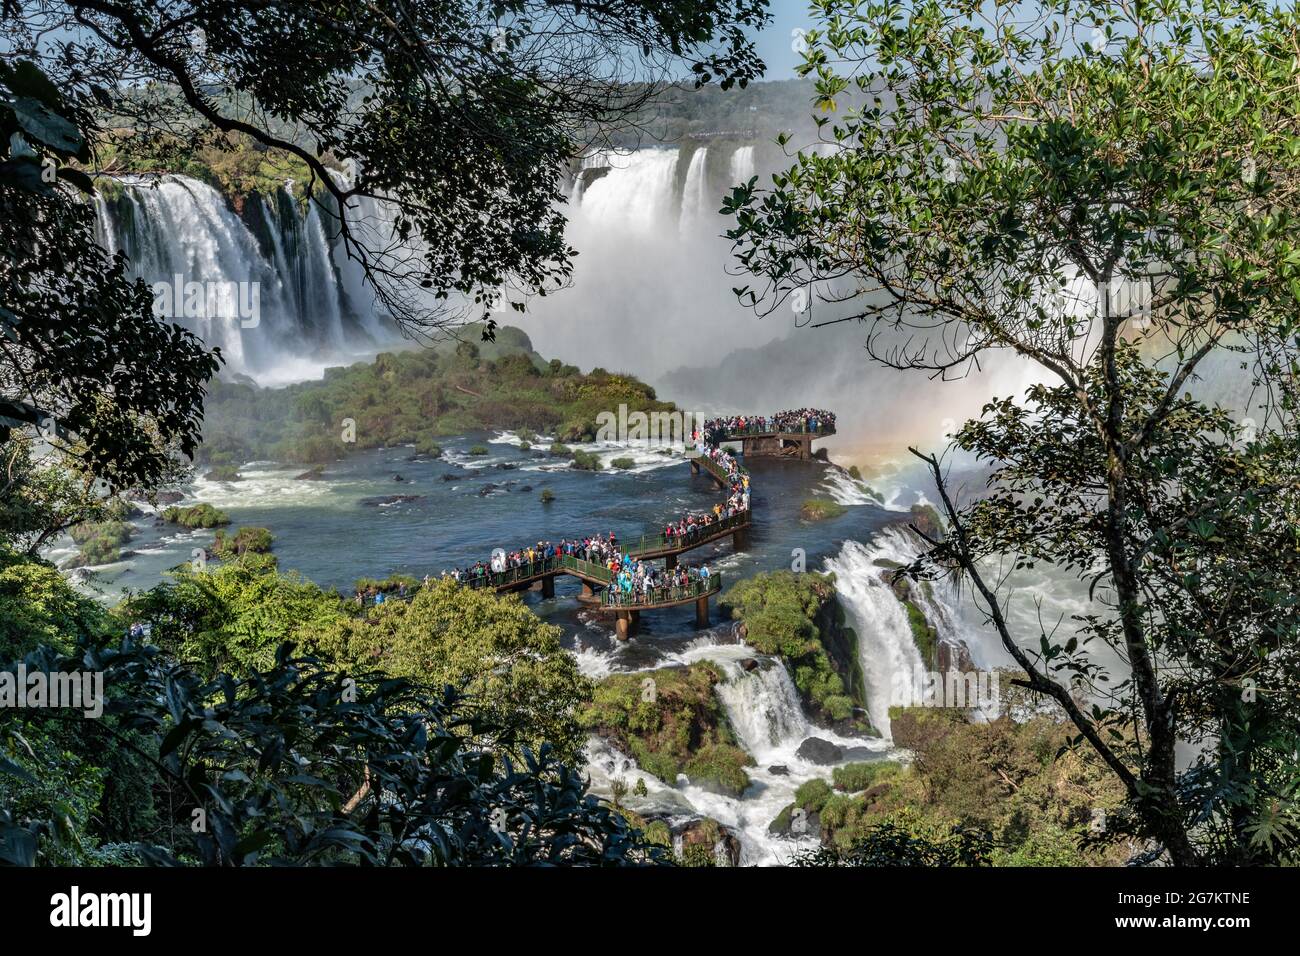 Tourists crowd on a boardwalk to get a close-up view of Iguazu Falls as seen from the Brazilian side Stock Photo